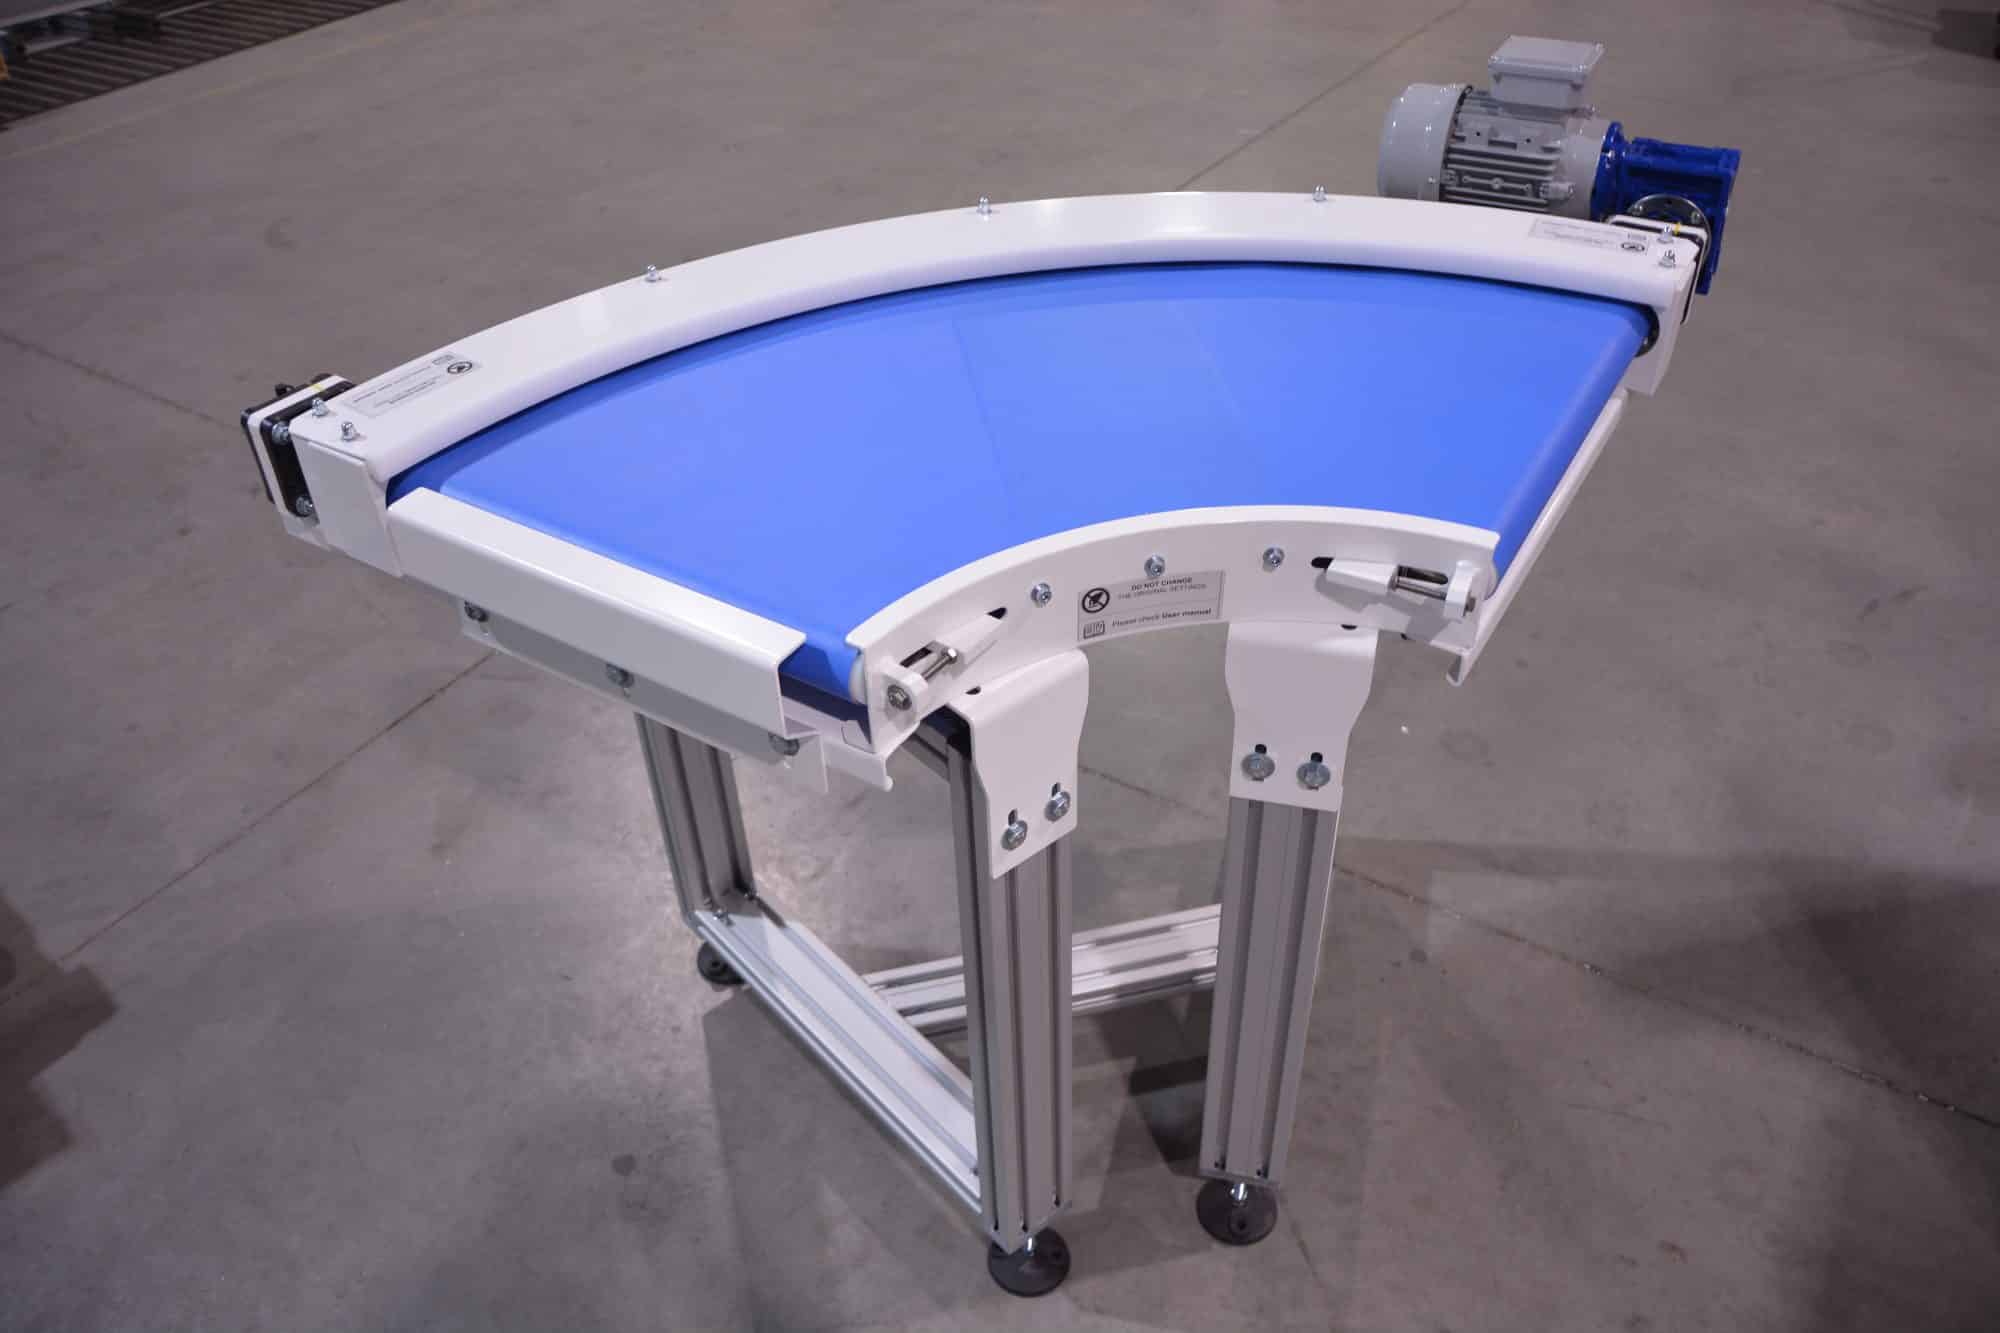 Modular components can easily be combined with straight belt conveyors. This way you can easily set up your ideal curved belt conveyors.